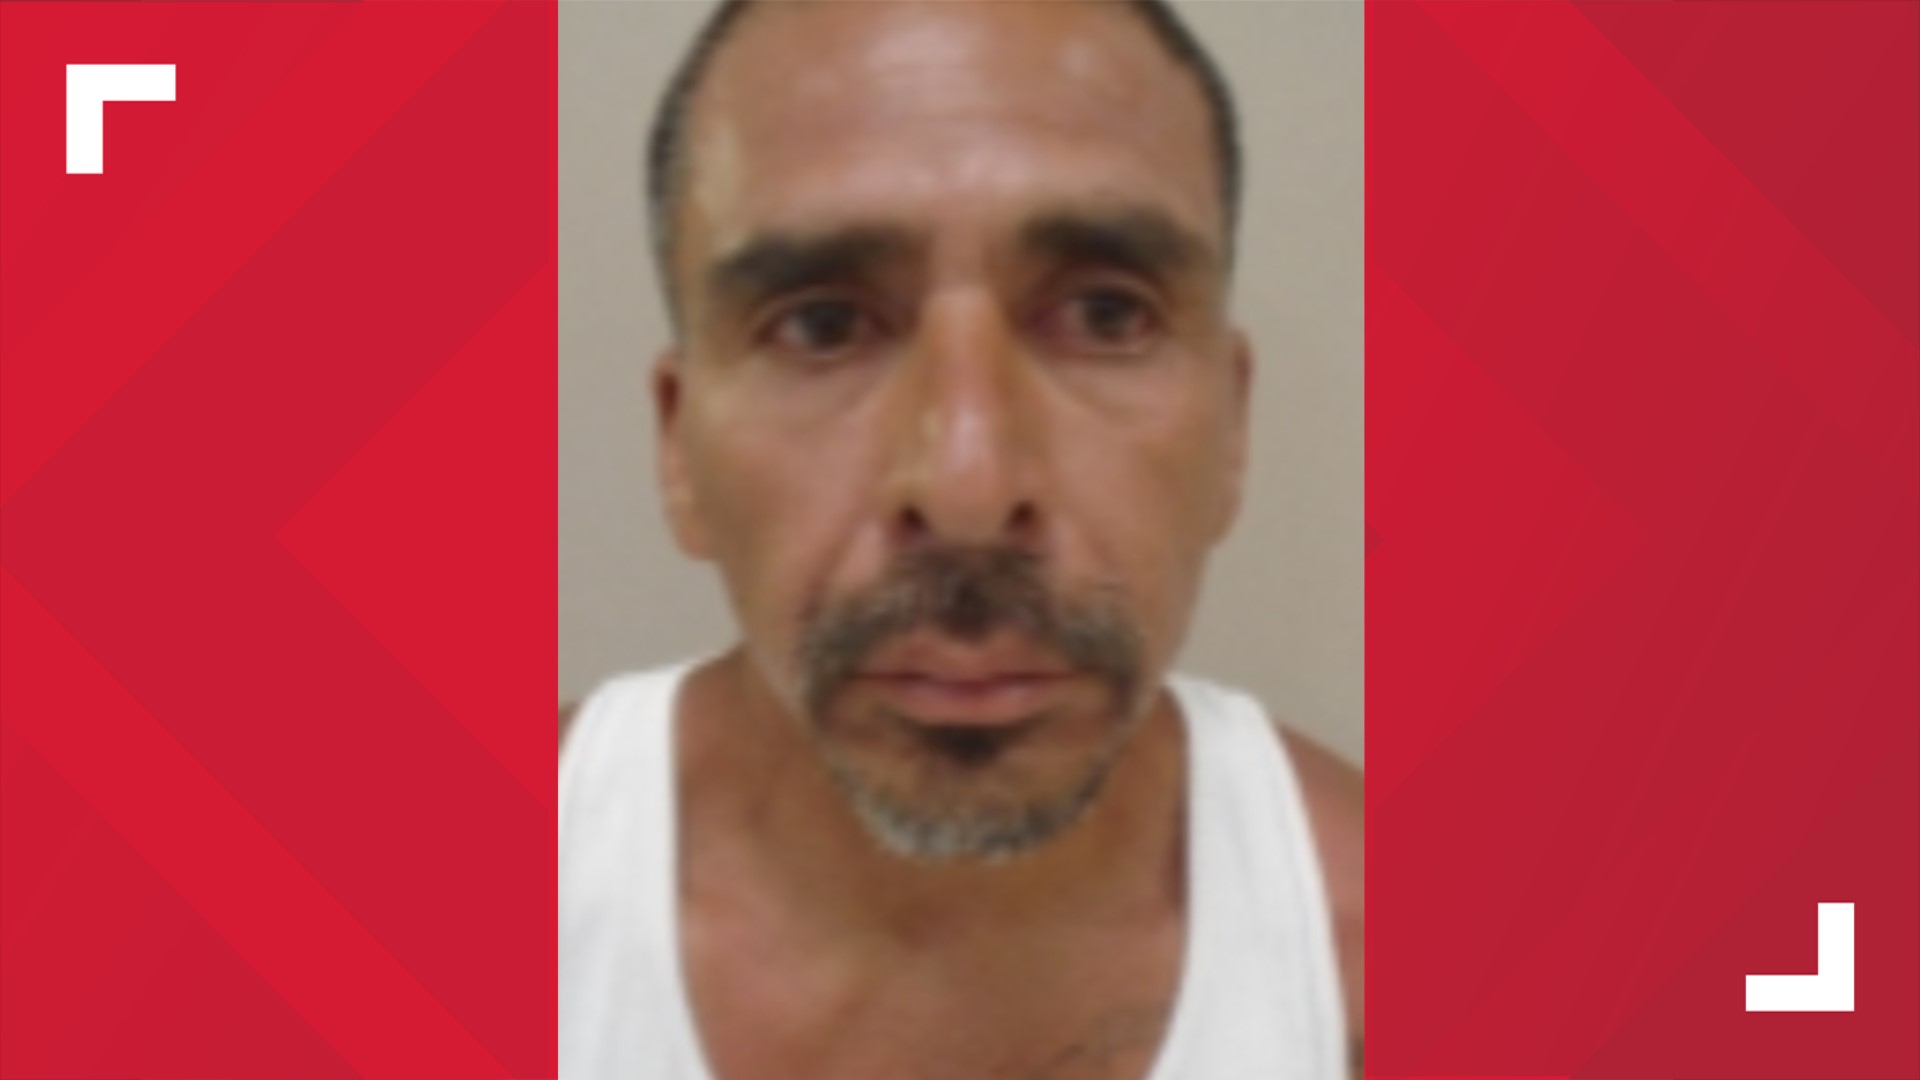 John Paul Ramirez, 46, has been charged with the murder of 63-year-old Kenneth Lee Murphy.